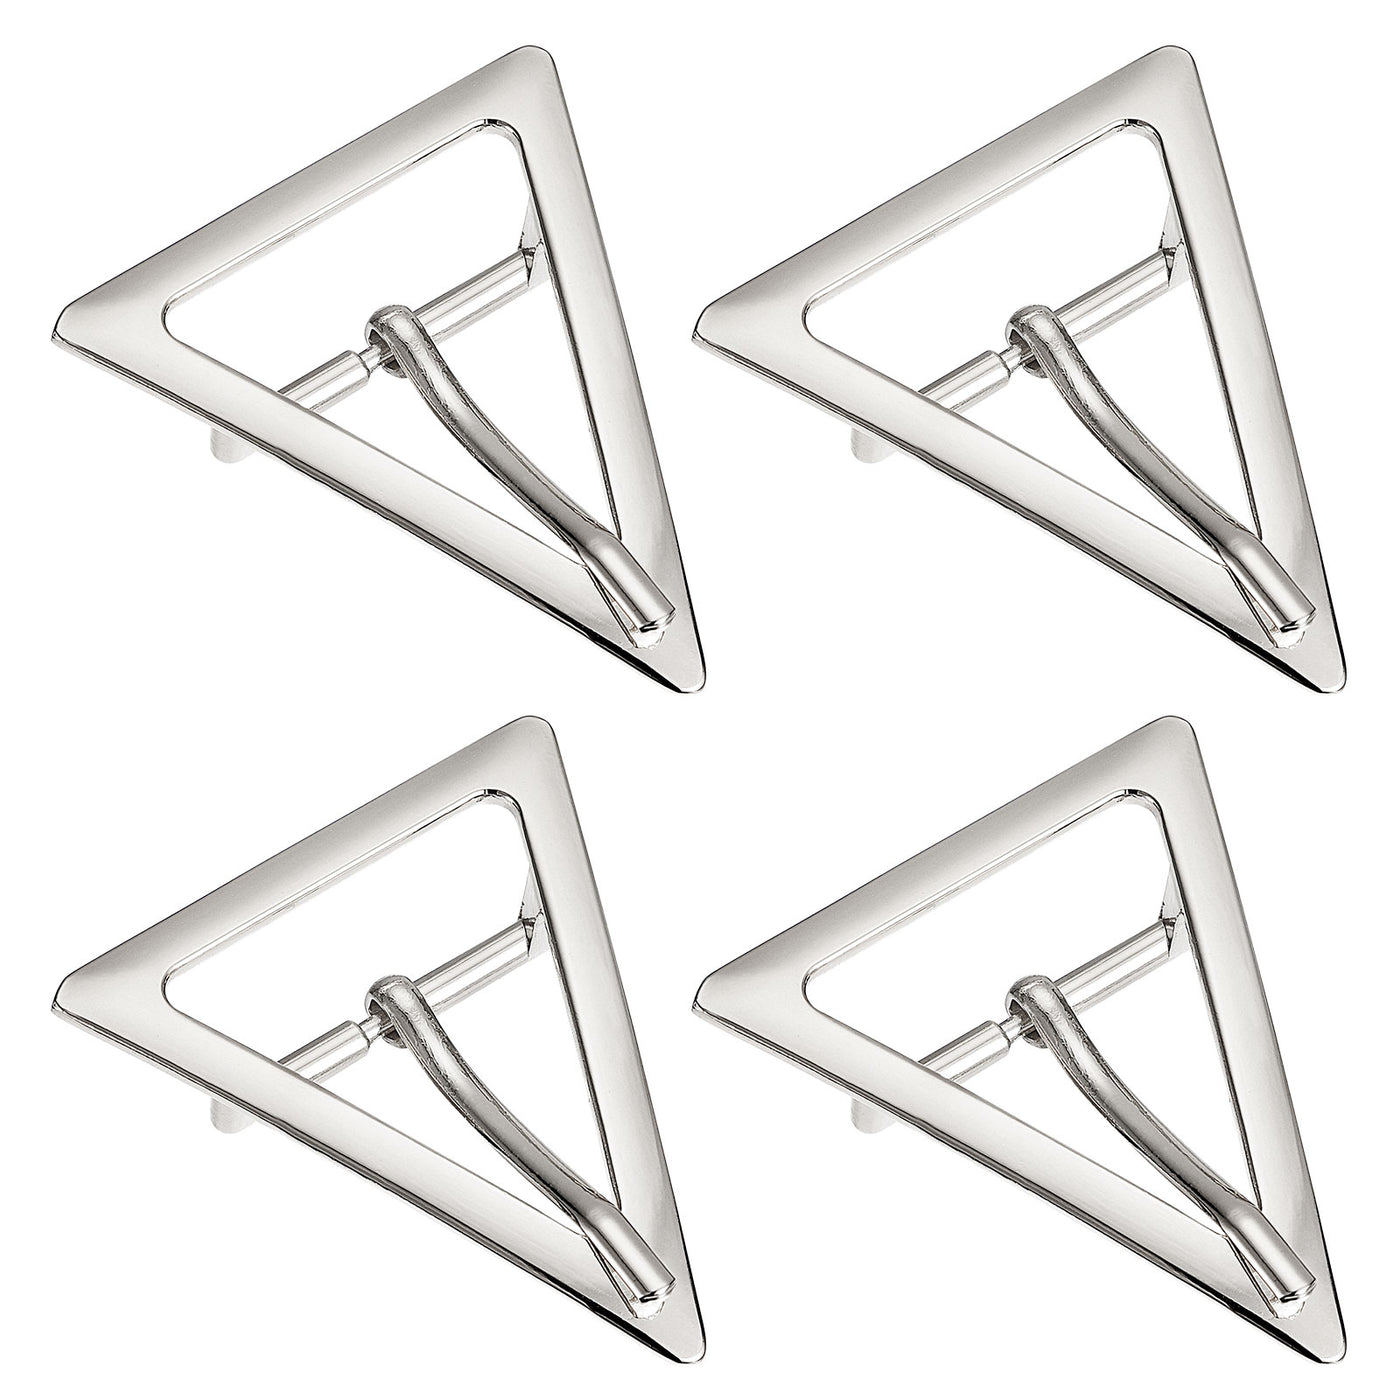 uxcell Uxcell 4Pcs 1.3" Single Prong Belt Buckle Triangle Center Bar Buckles for Belt, Silver